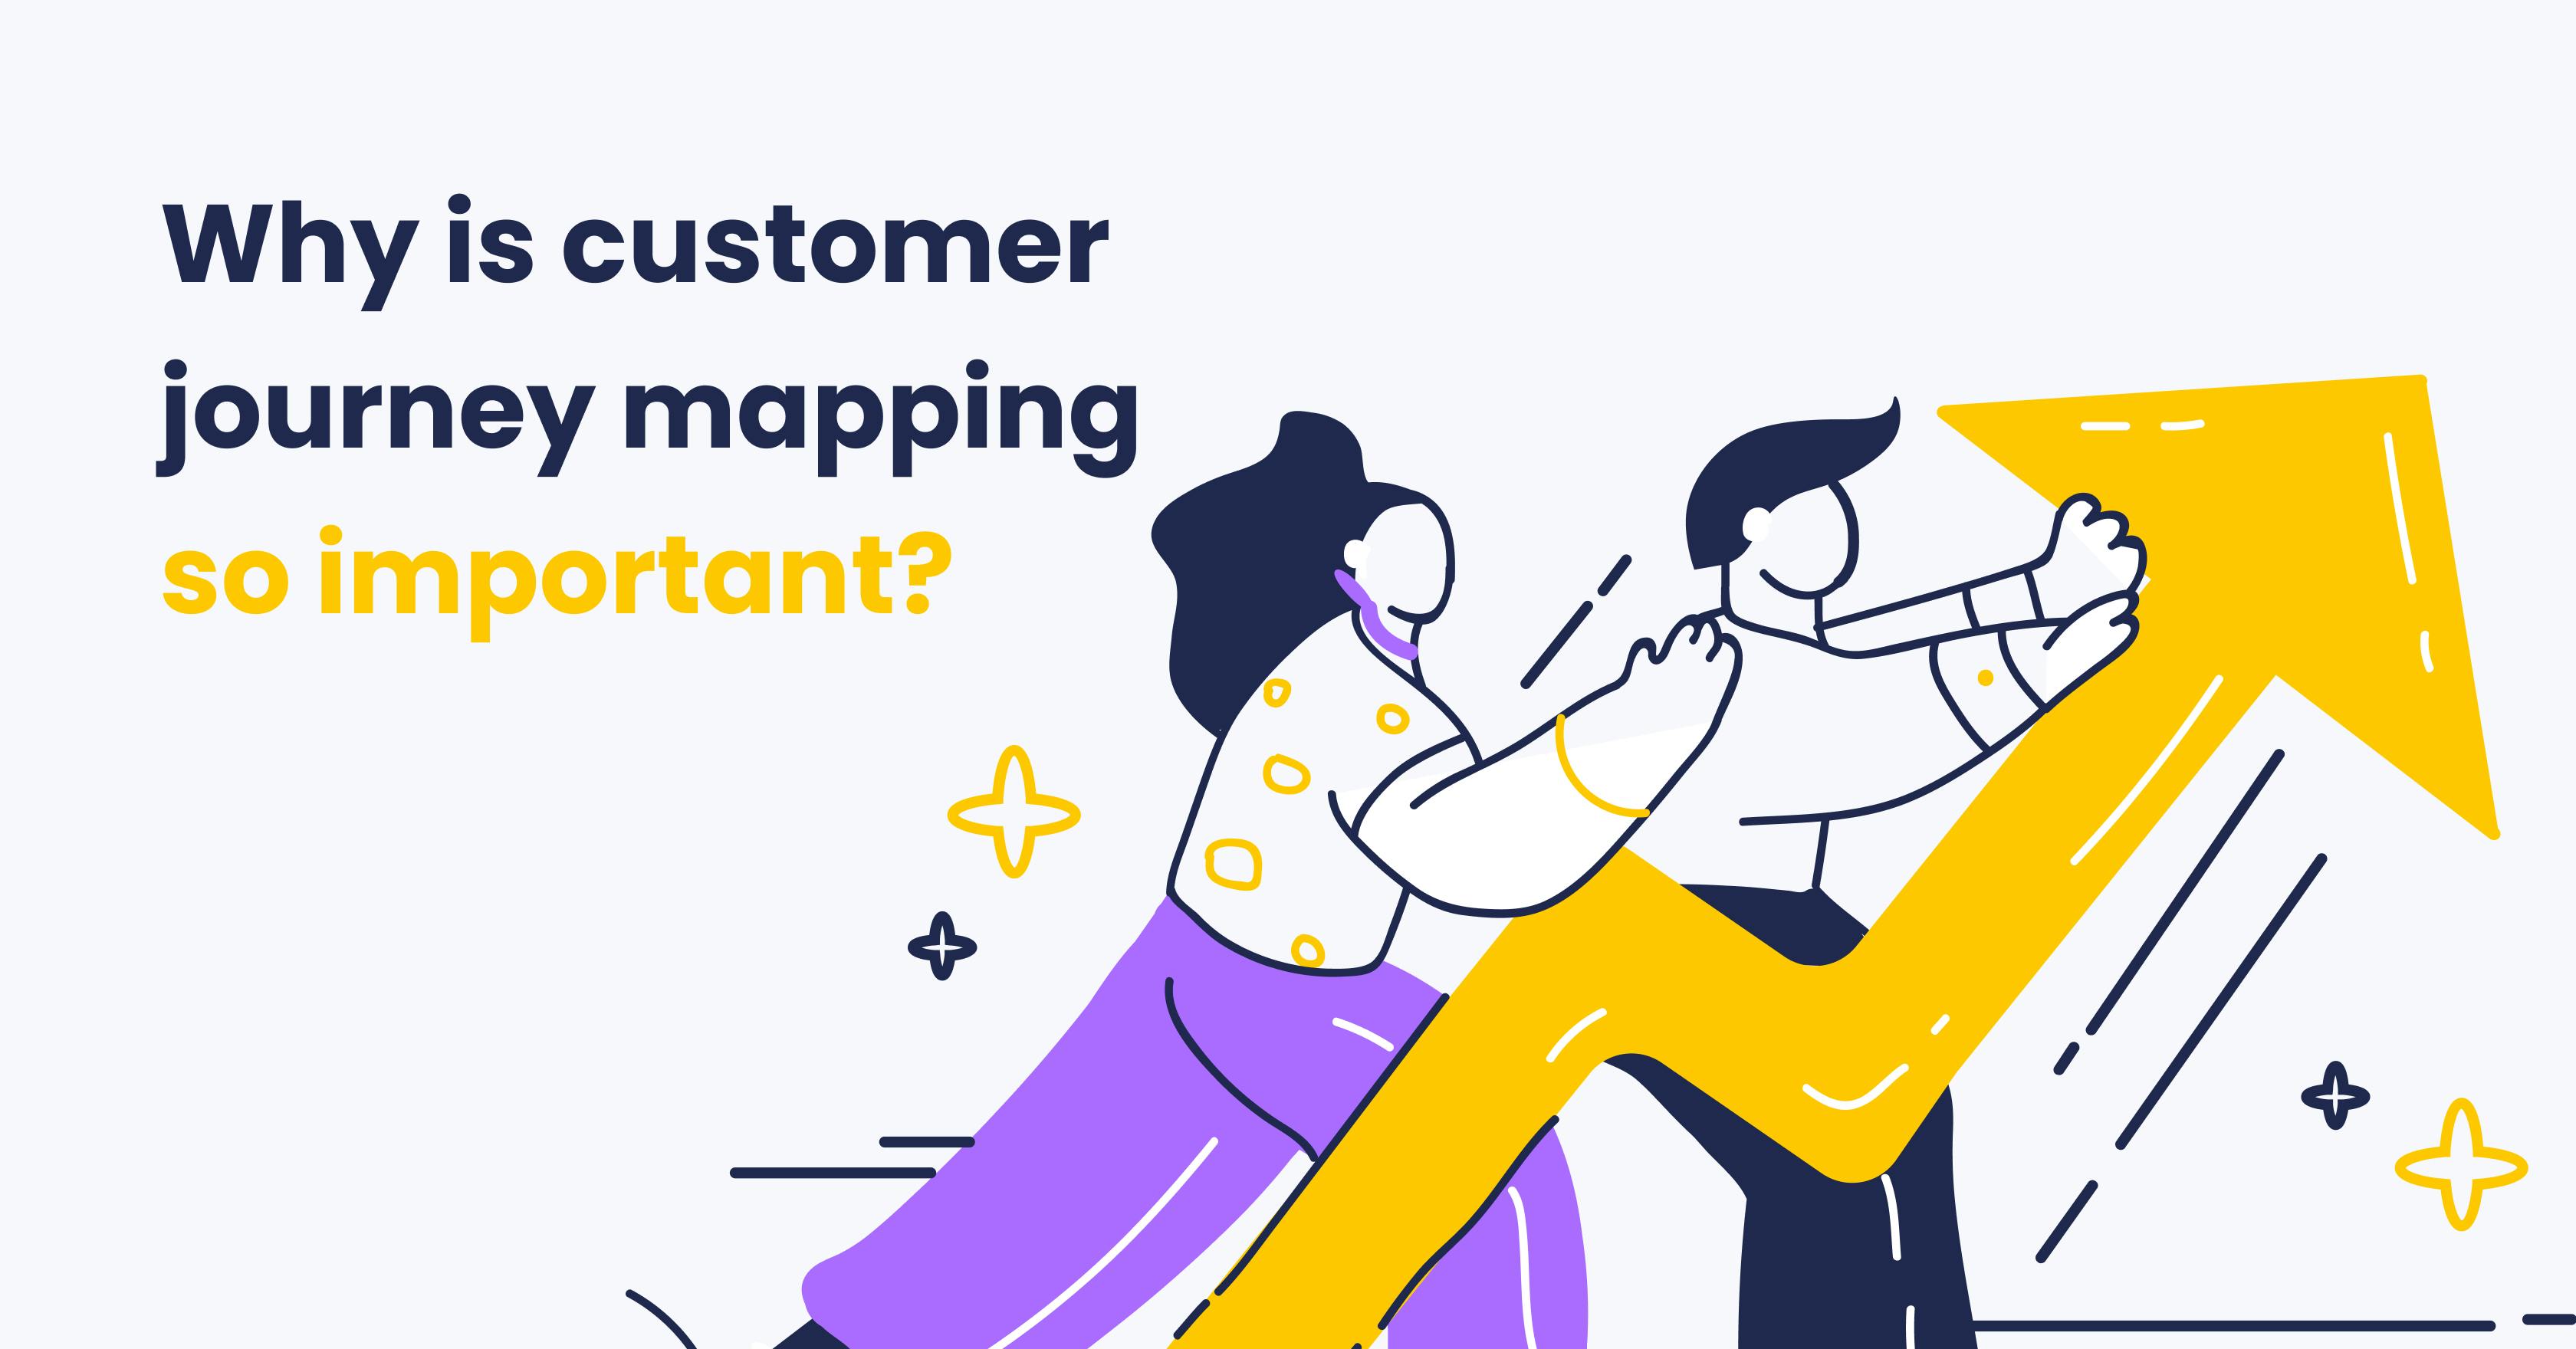 Why is customer journey mapping so important?